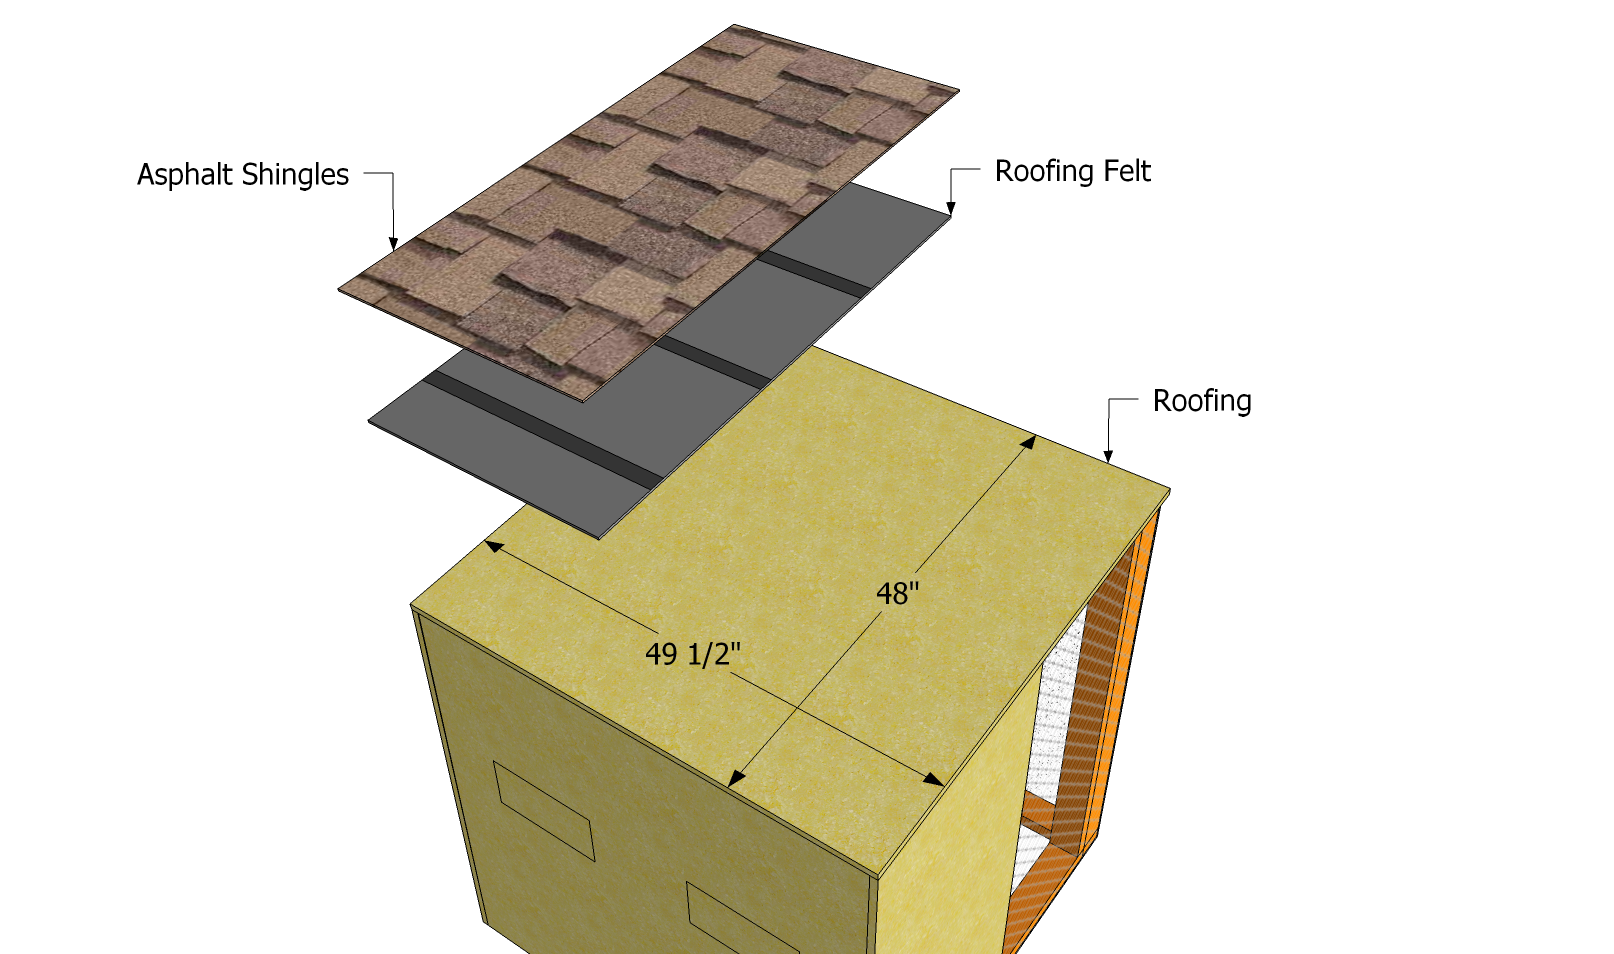 Roofing a Shed Roof with Shingles